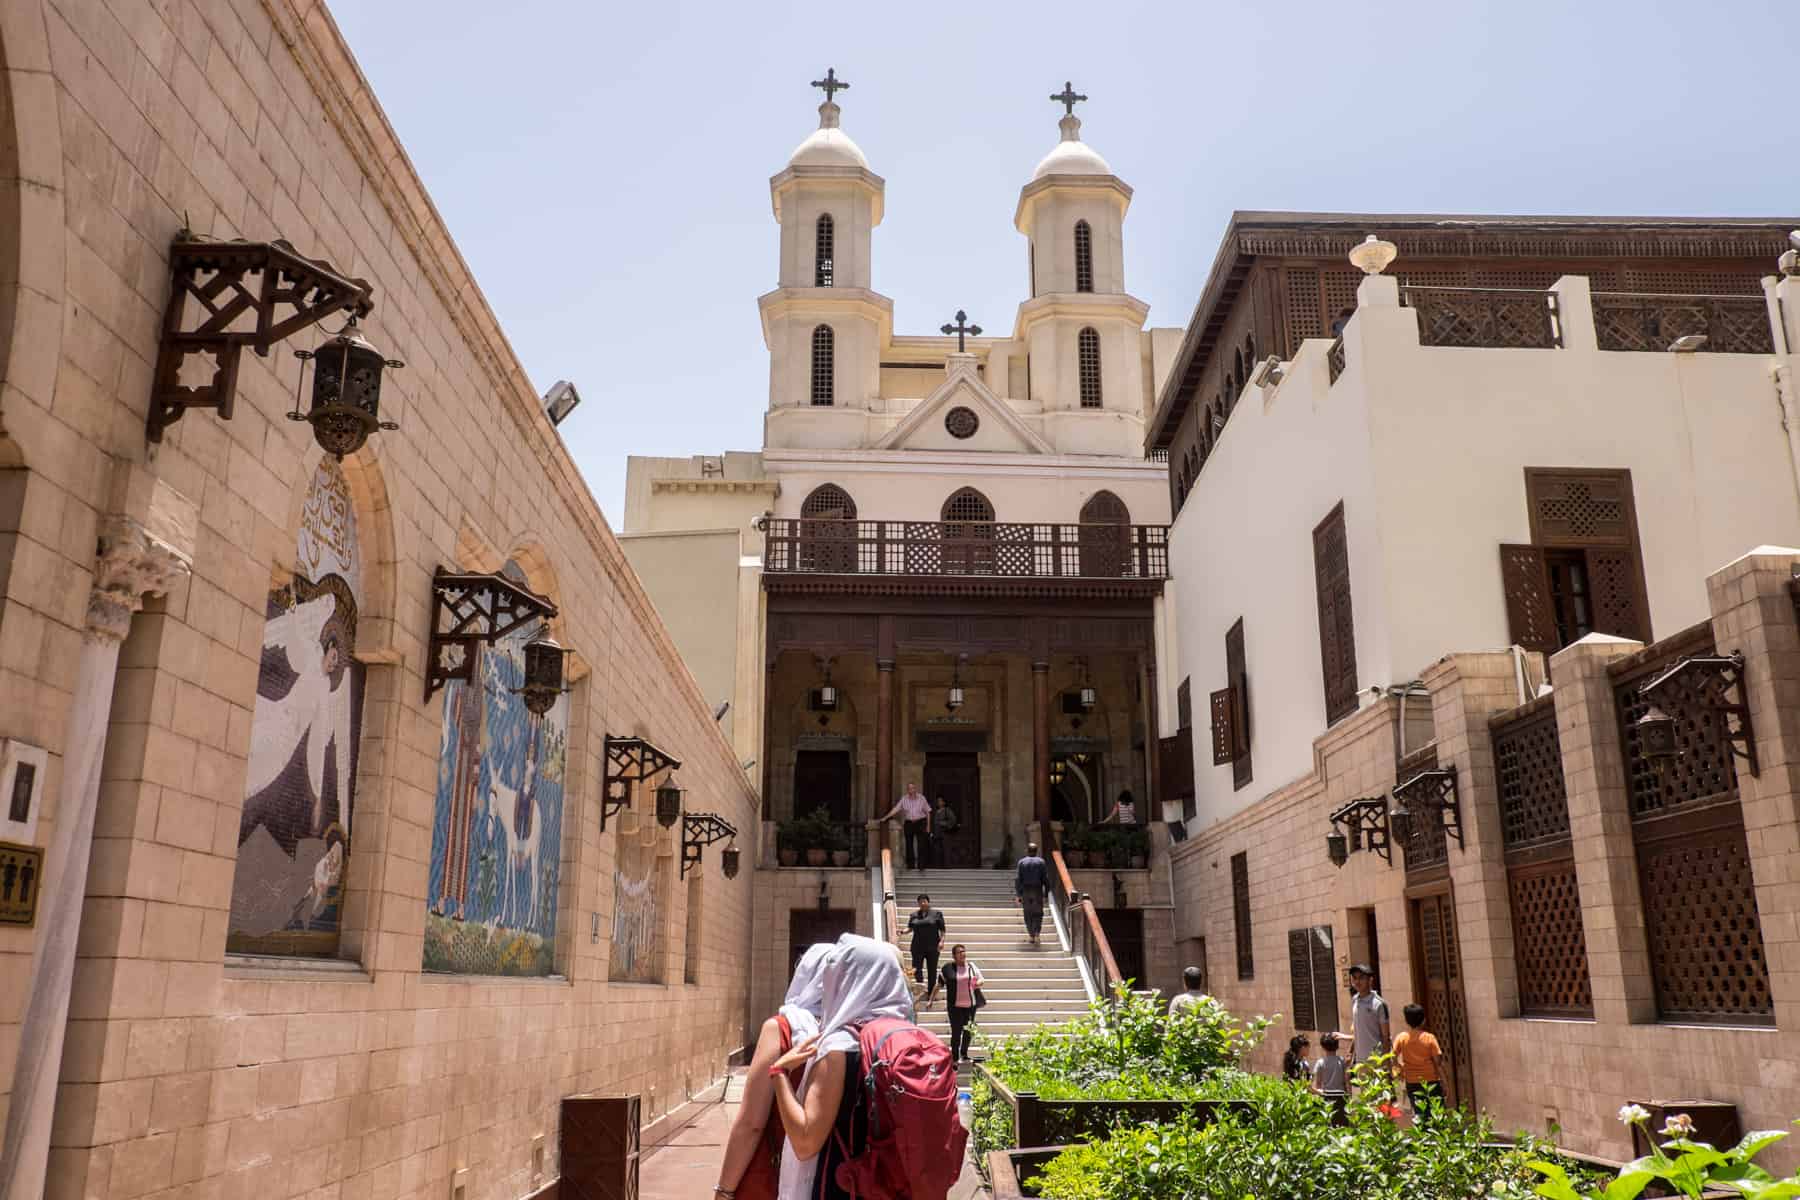 Tourists in headscarves approach the steps leading to the entrance of the Hanging Church in Cairo, Egypt